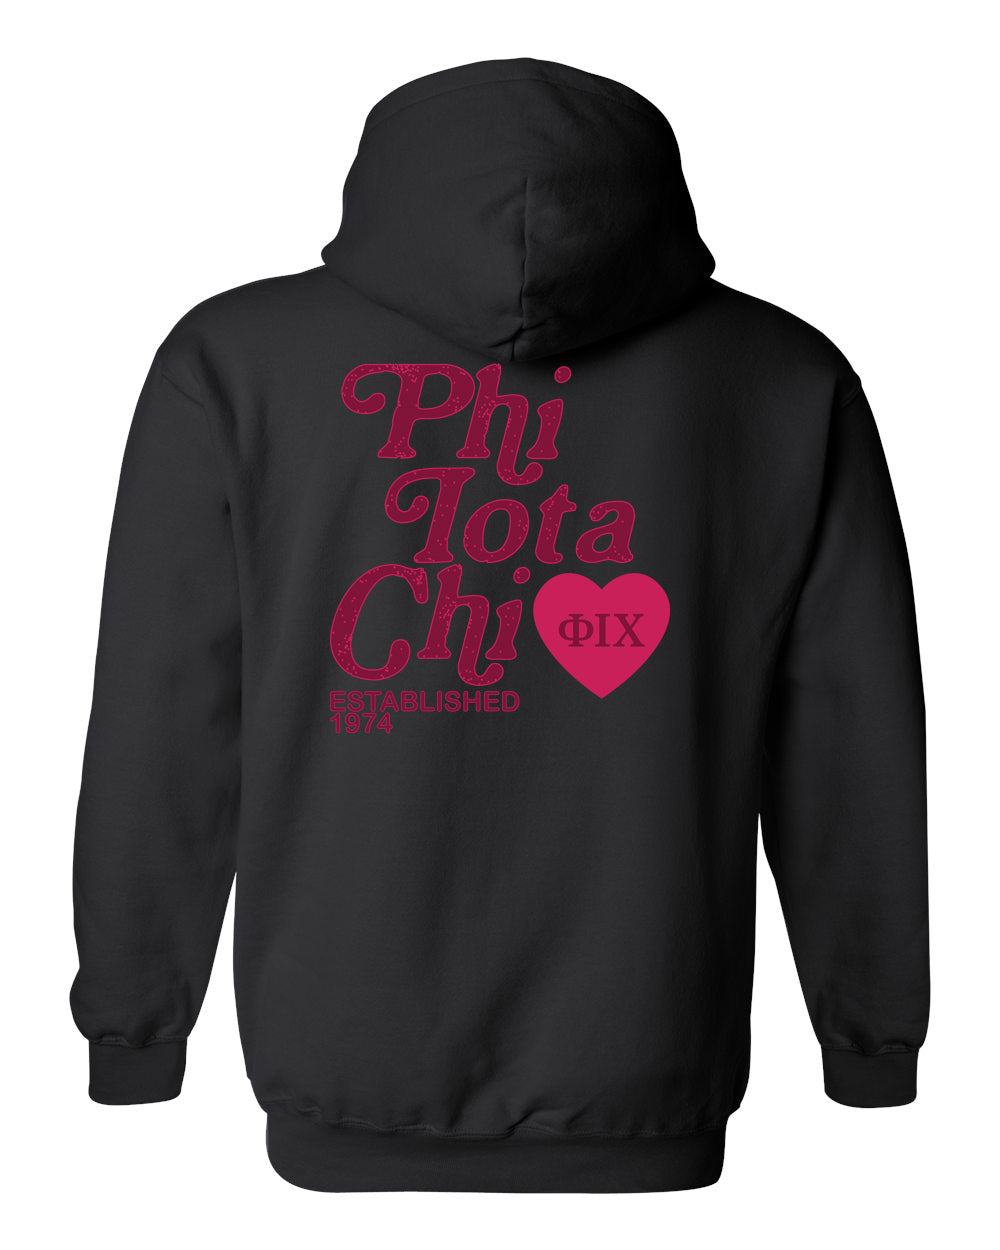 a black hoodie with a pink heart on it